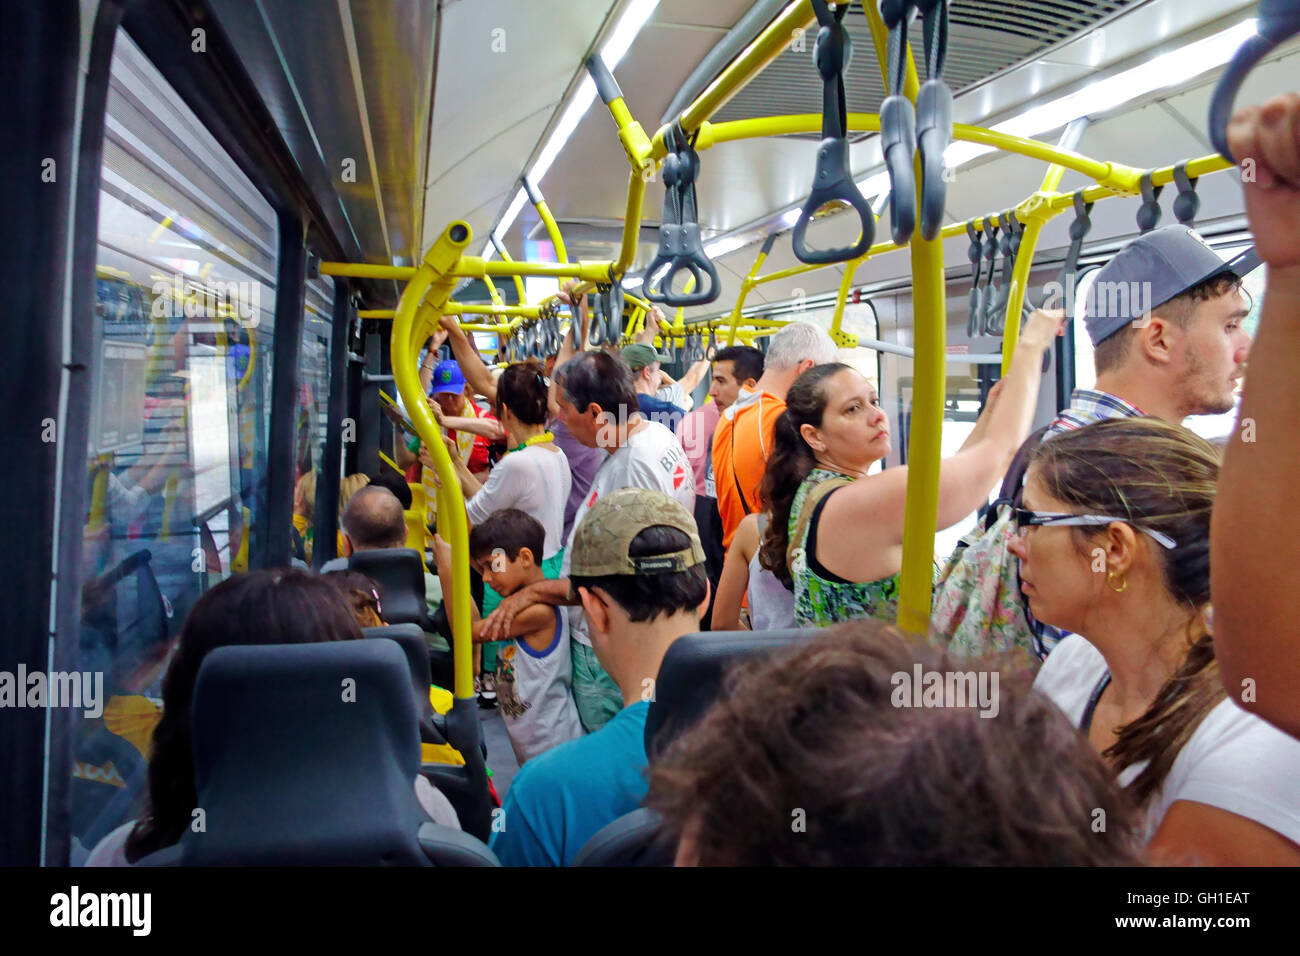 Rio de Janeiro, Brazil;. 7th August, 2016. Packed BRT (Bus Rapid Transport) bus, part of the new transportation system in Rio de Janeiro. Credit:  PictureScotland/Alamy Live News Stock Photo